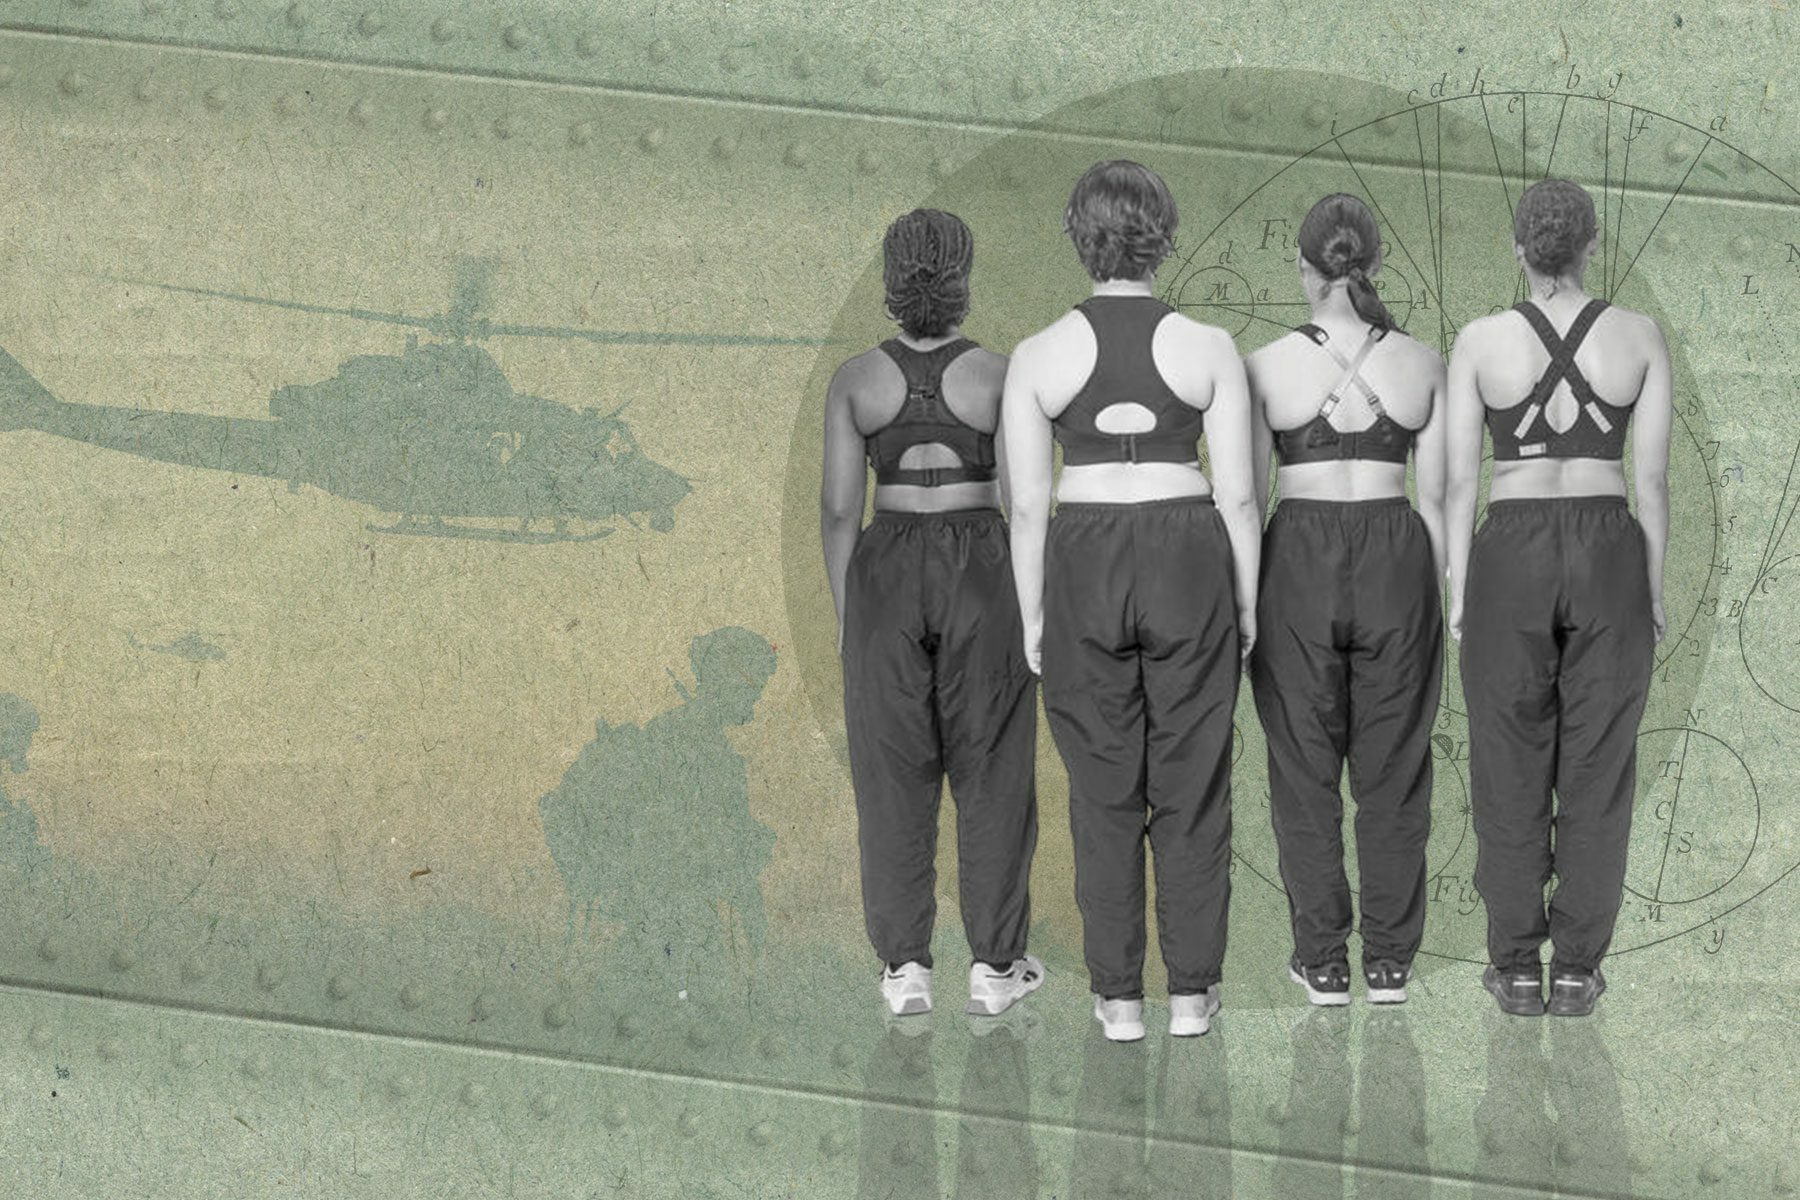 A view of 4 women standing together modeling the new Army tactical bras.